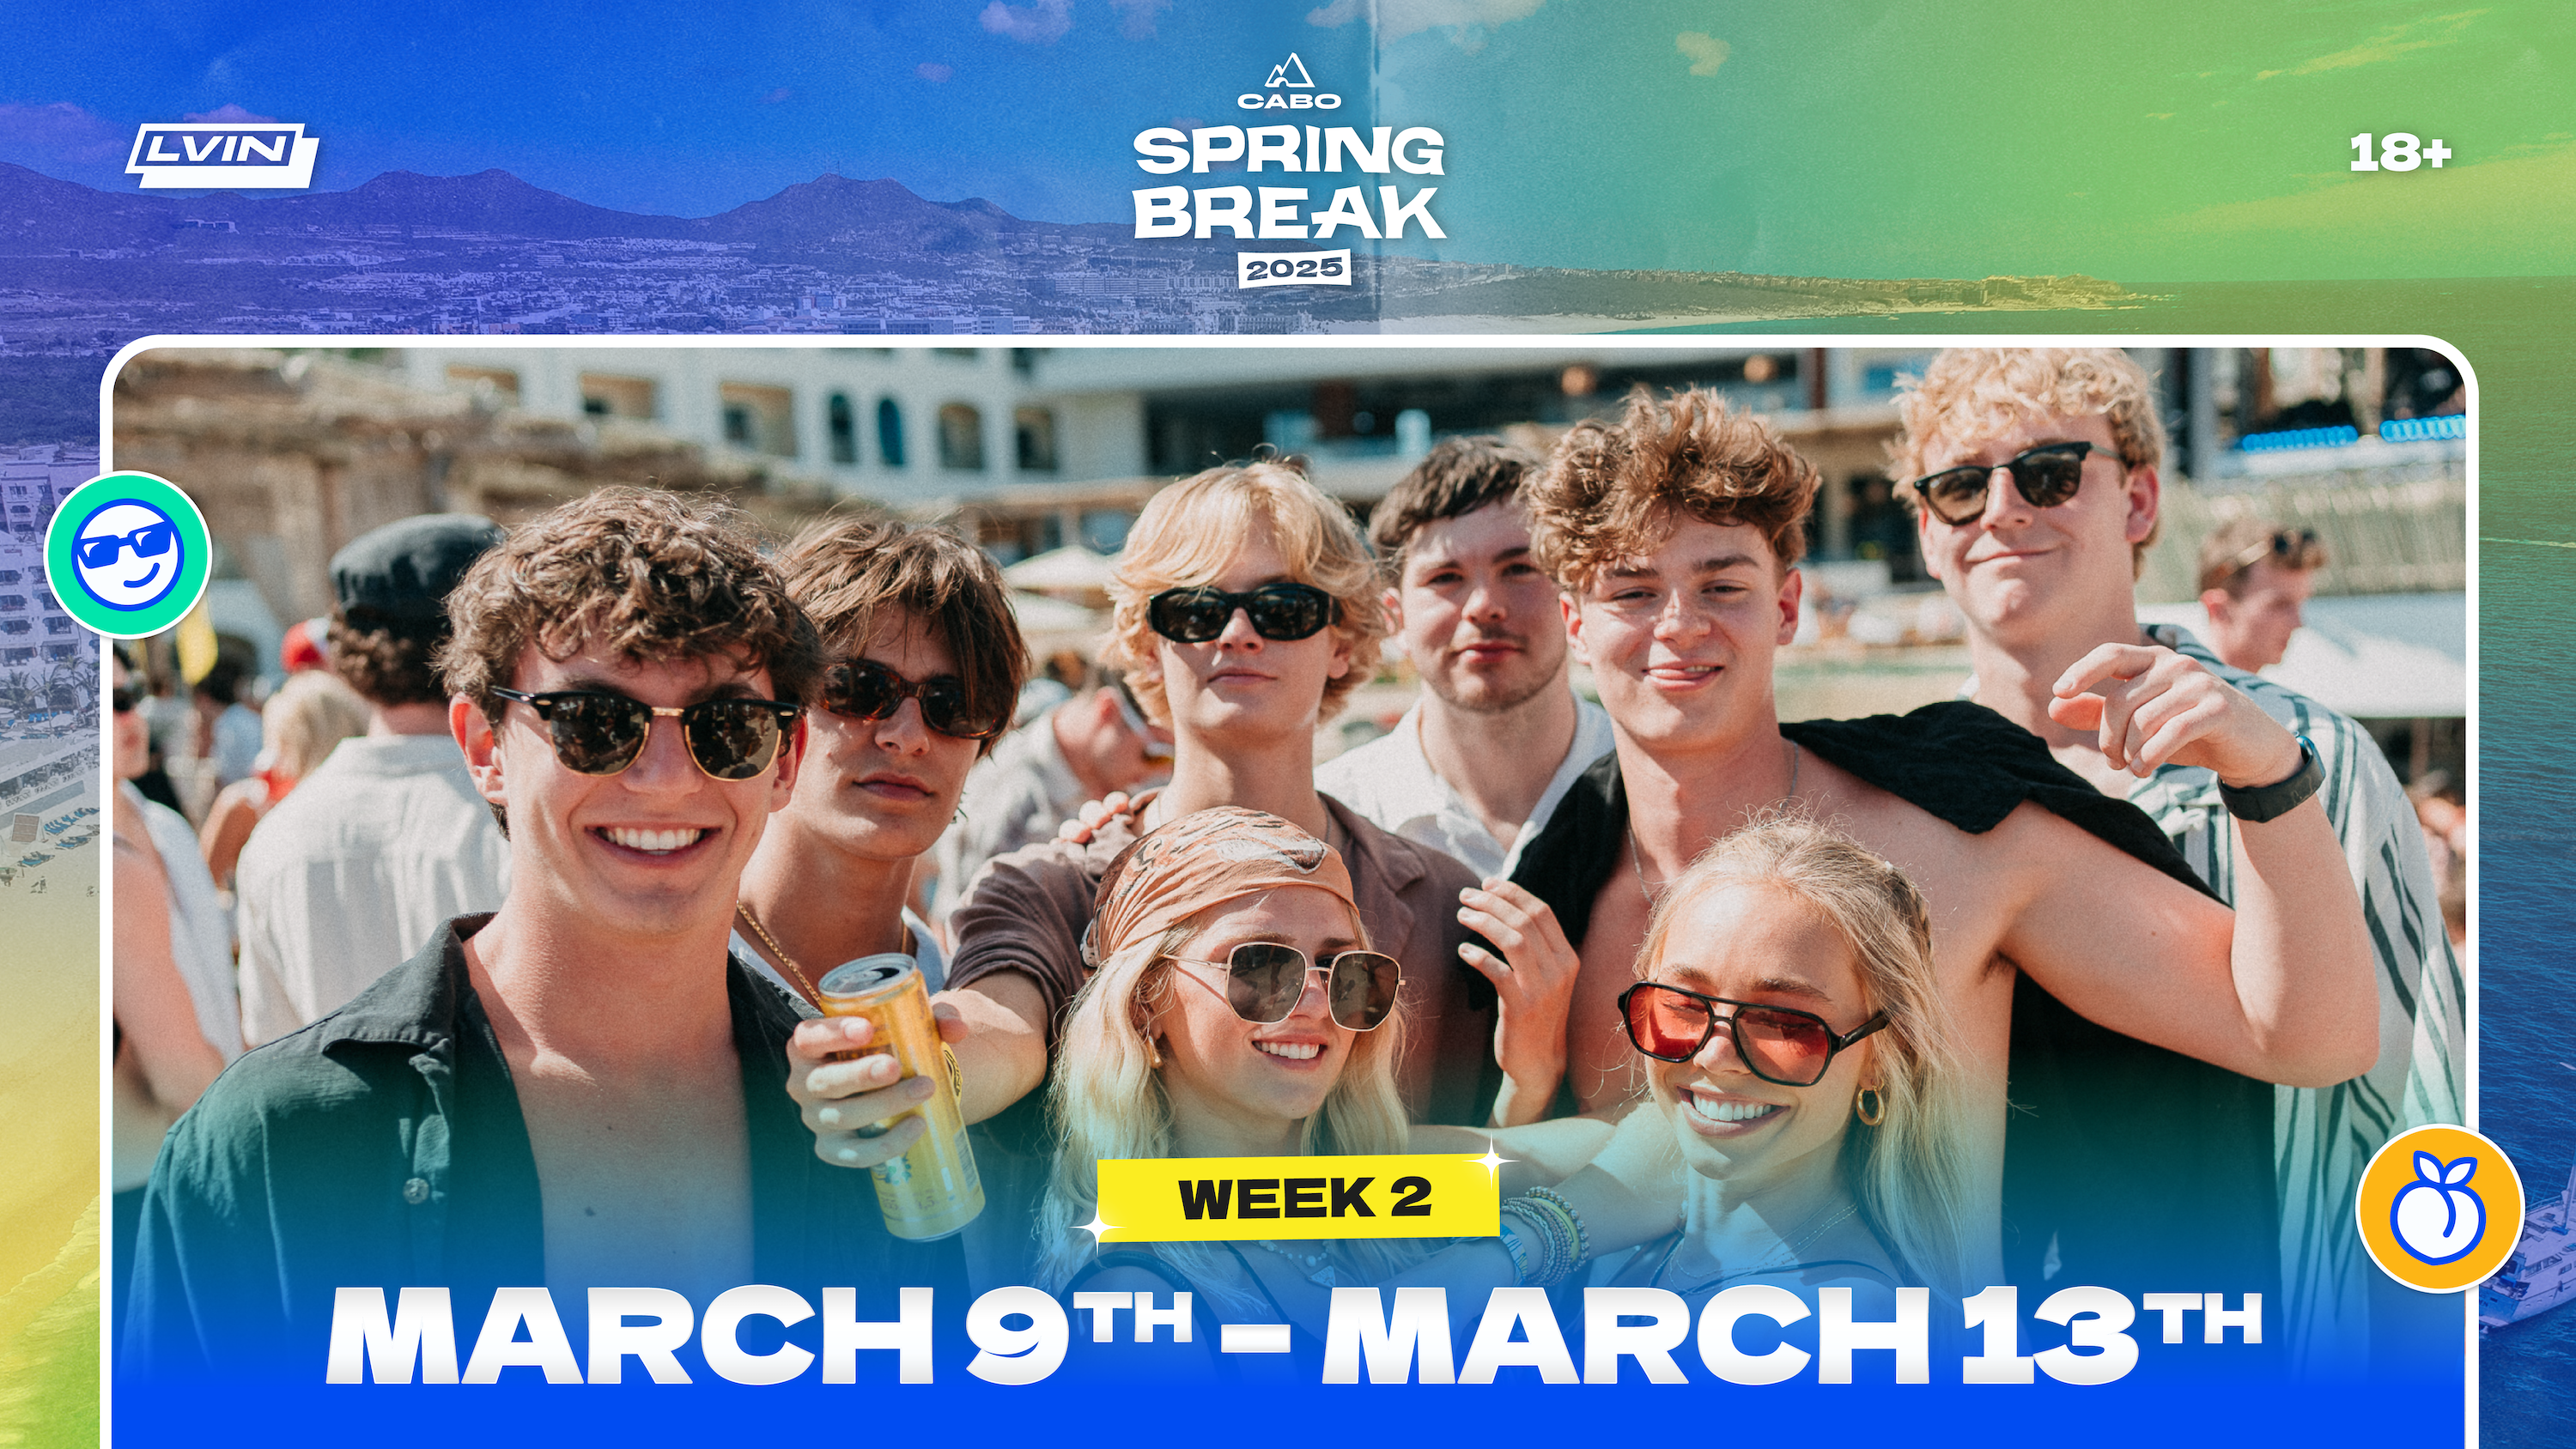 Cabo Spring Break 2025 Week 2 Header March 9 to March 13 LVIN